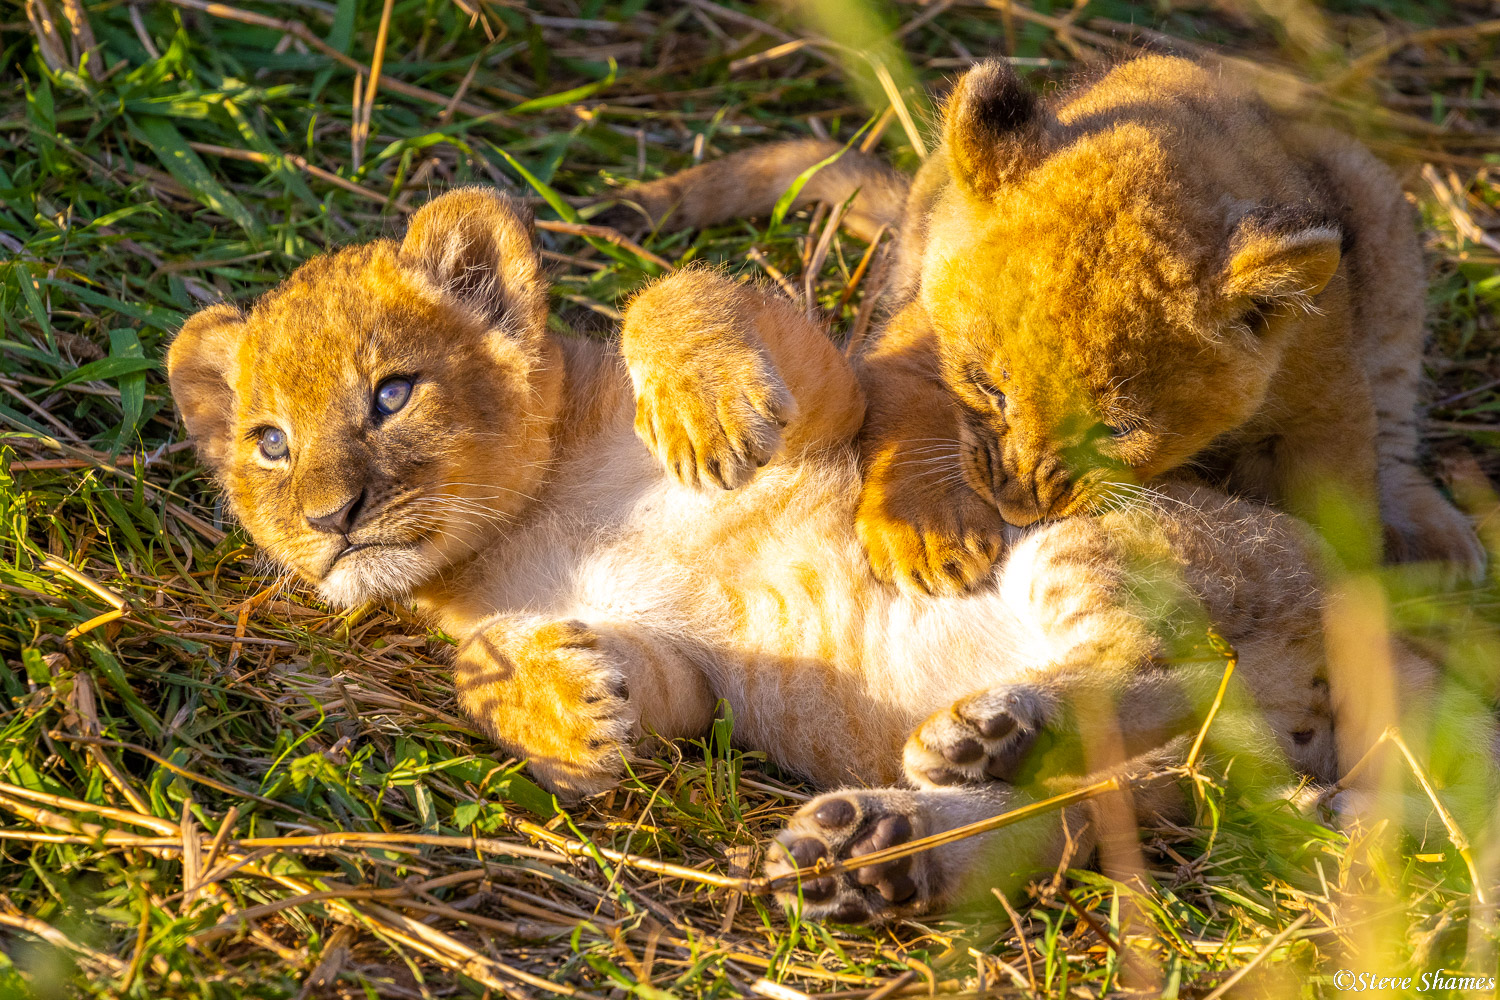 A couple of little lion cubs playing around in the grass.